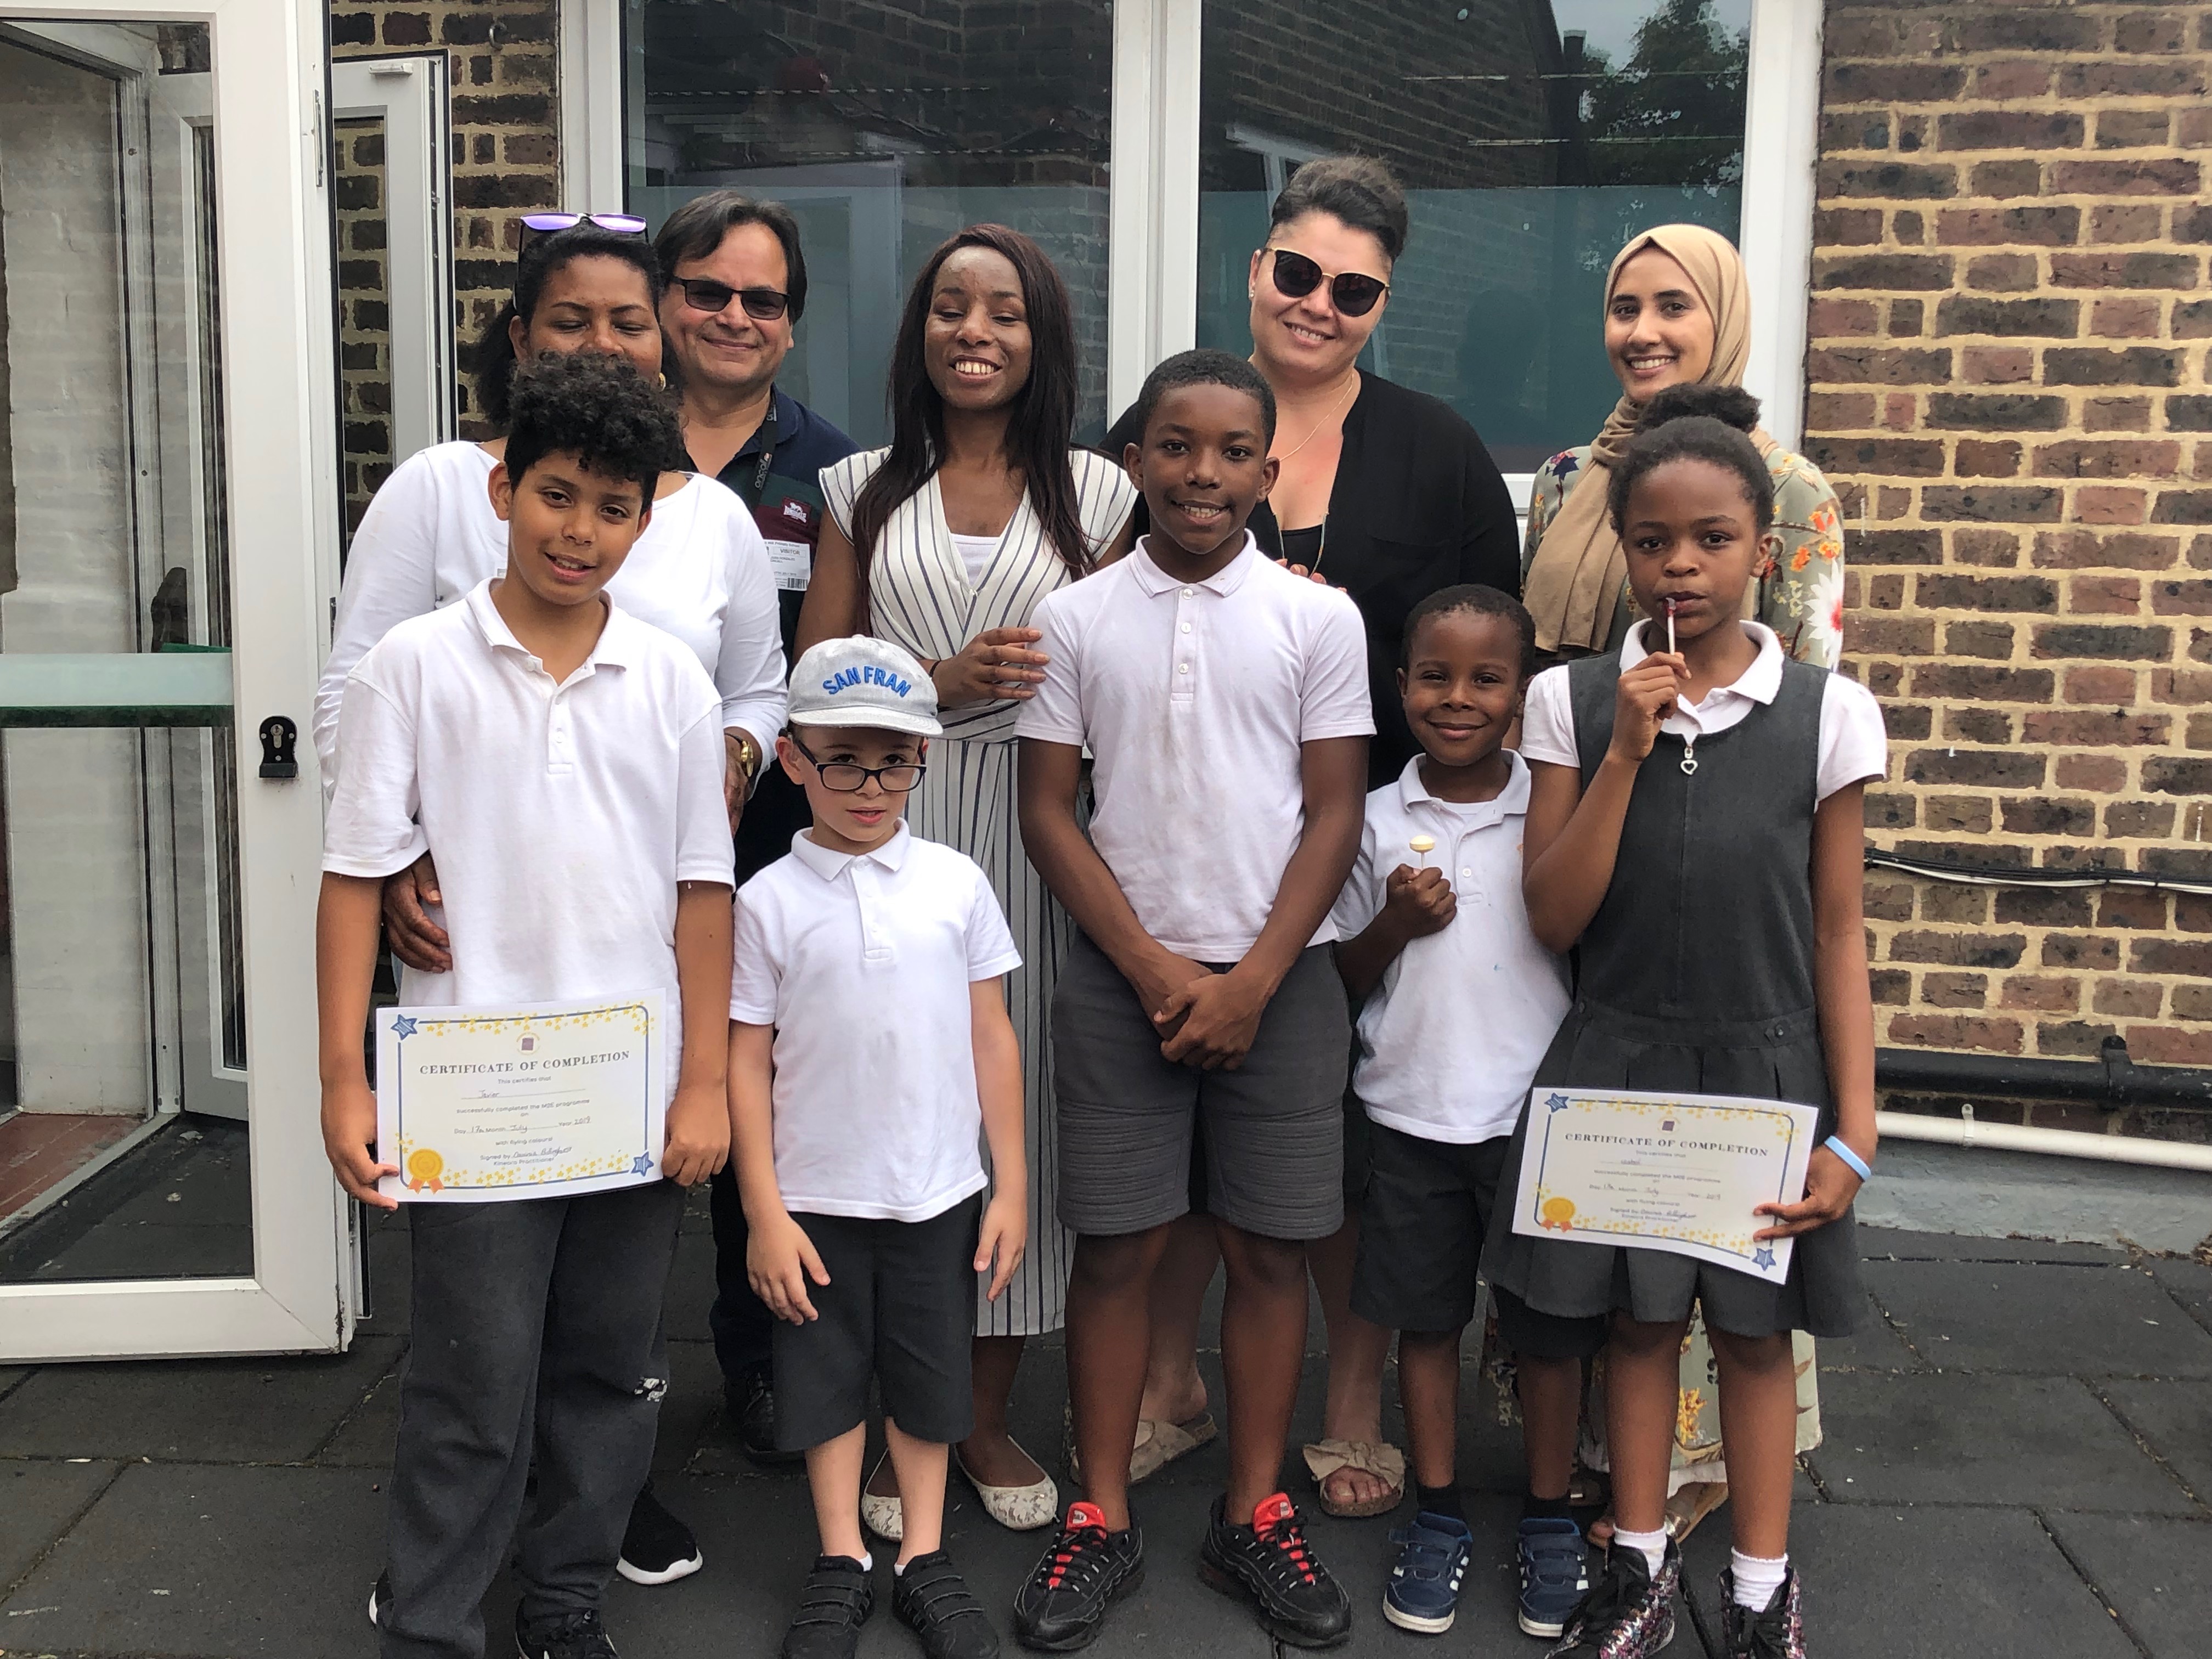 Primary pupils in Hackney celebrate after completing educational and emotional support programme